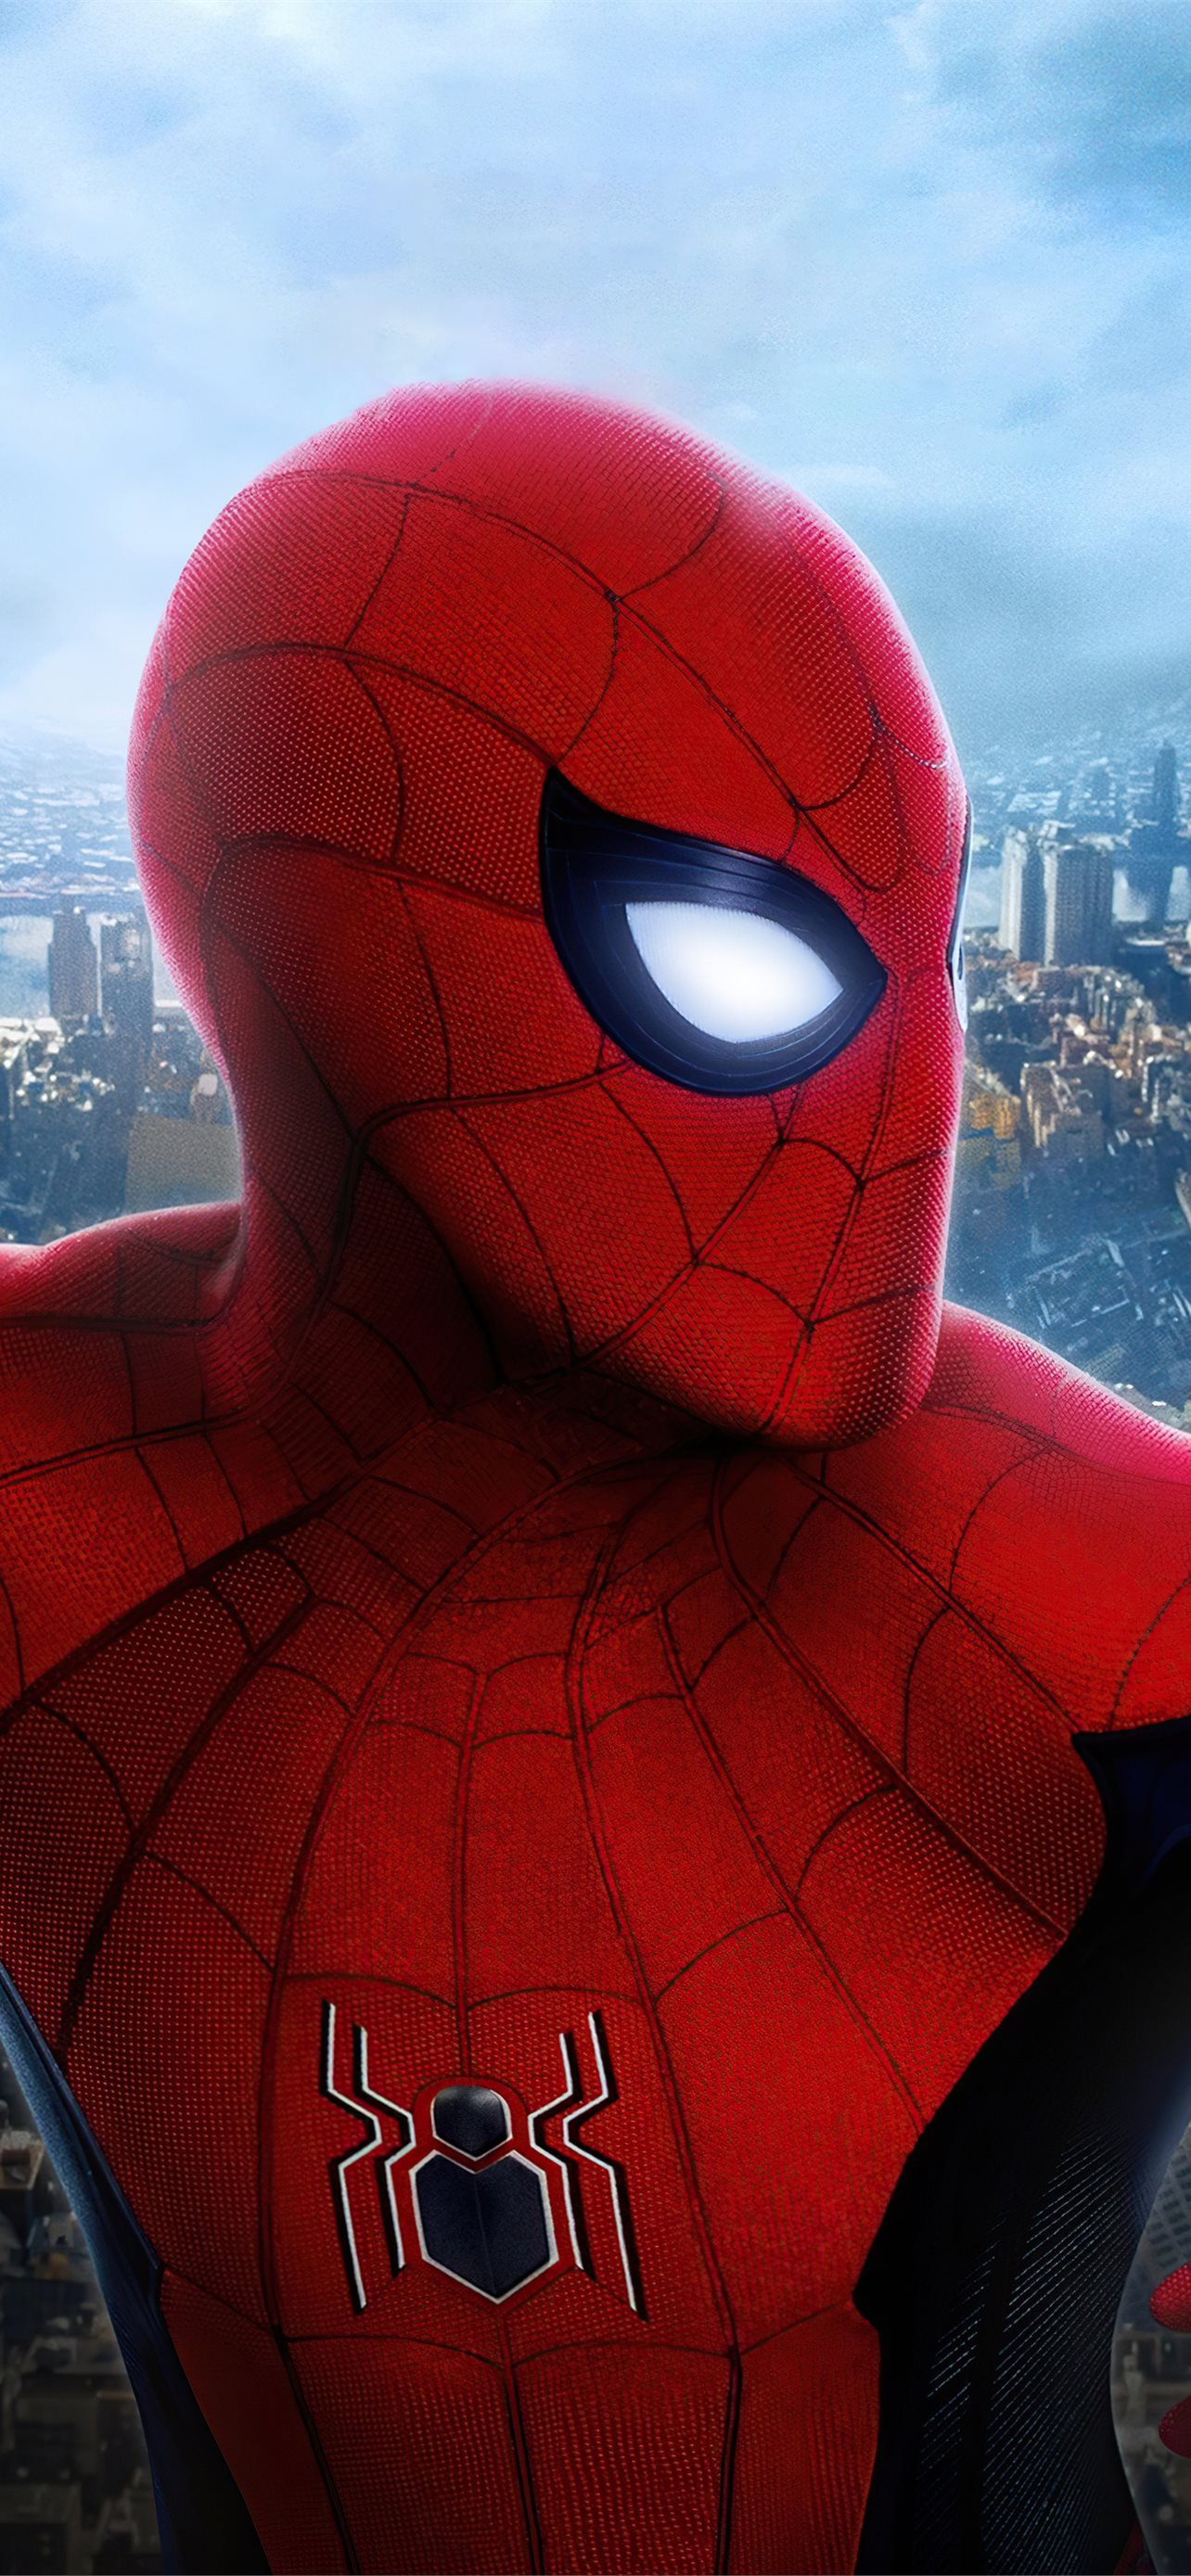 spider man no way home poster 4k iPhone Wallpaper Free Download